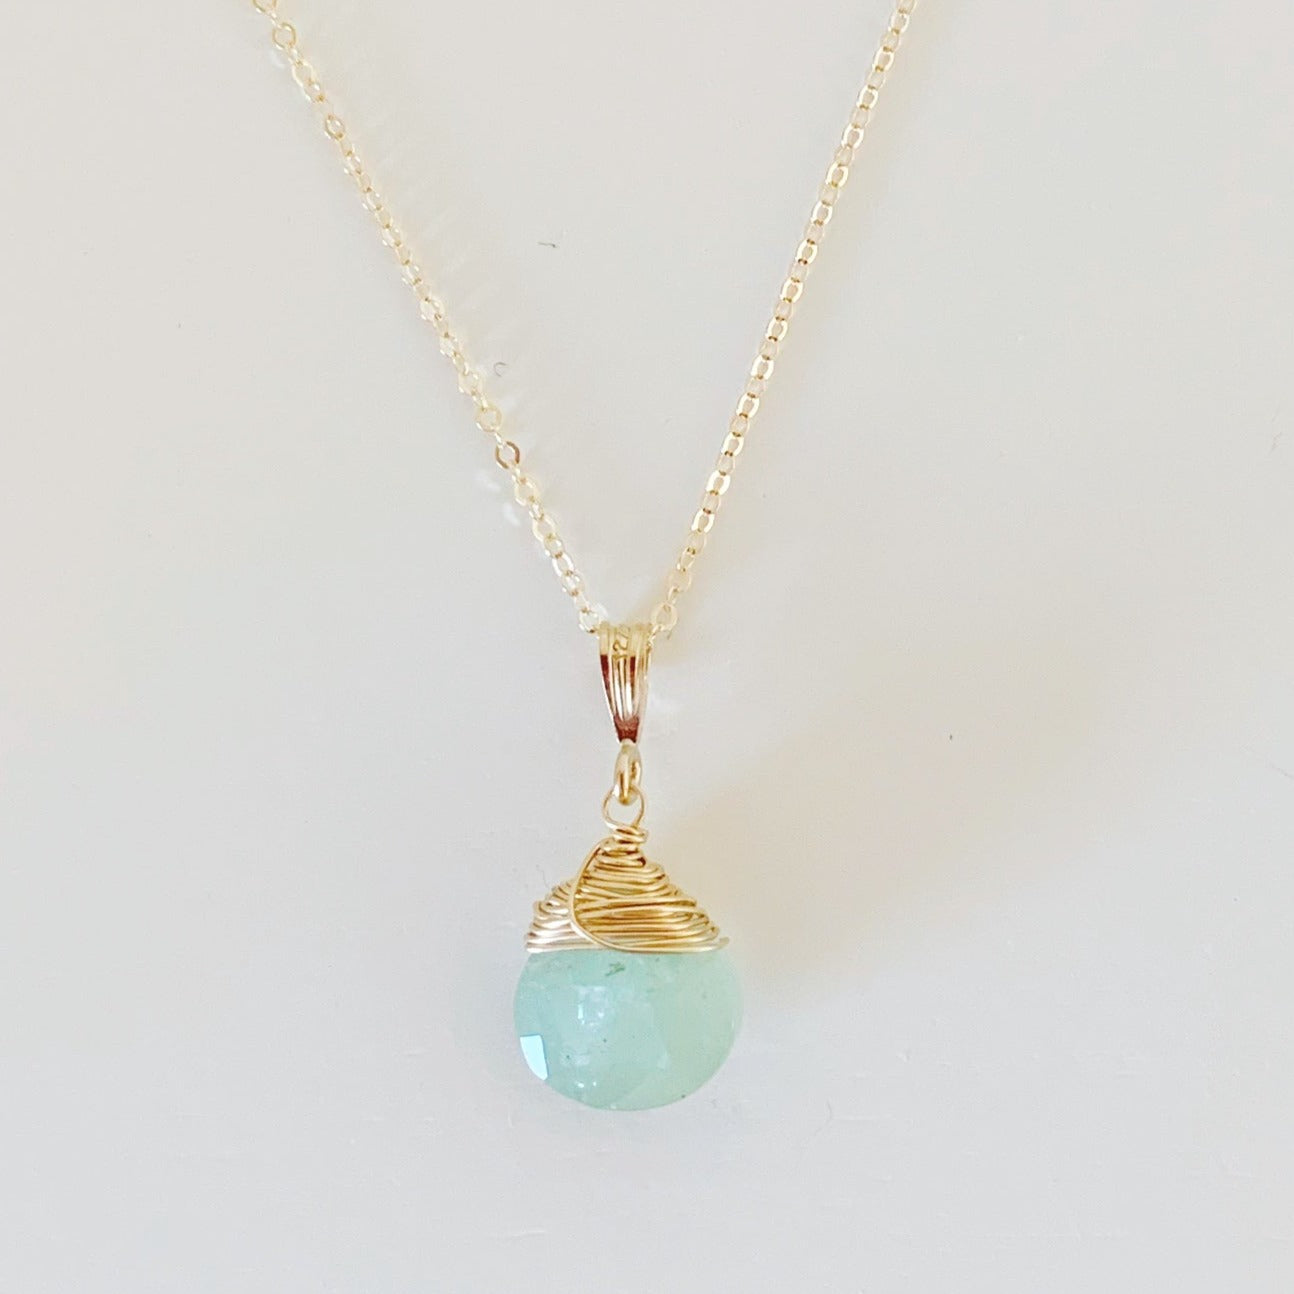 the raindrop necklace by mermaids and madeleines is a pendant style necklace featuring a ocean color aquamarine faceted briolette wire wrapped with 14k gold filled wire and hanging from a 14k gold filled chain. this necklace is photographed on a flat white surface